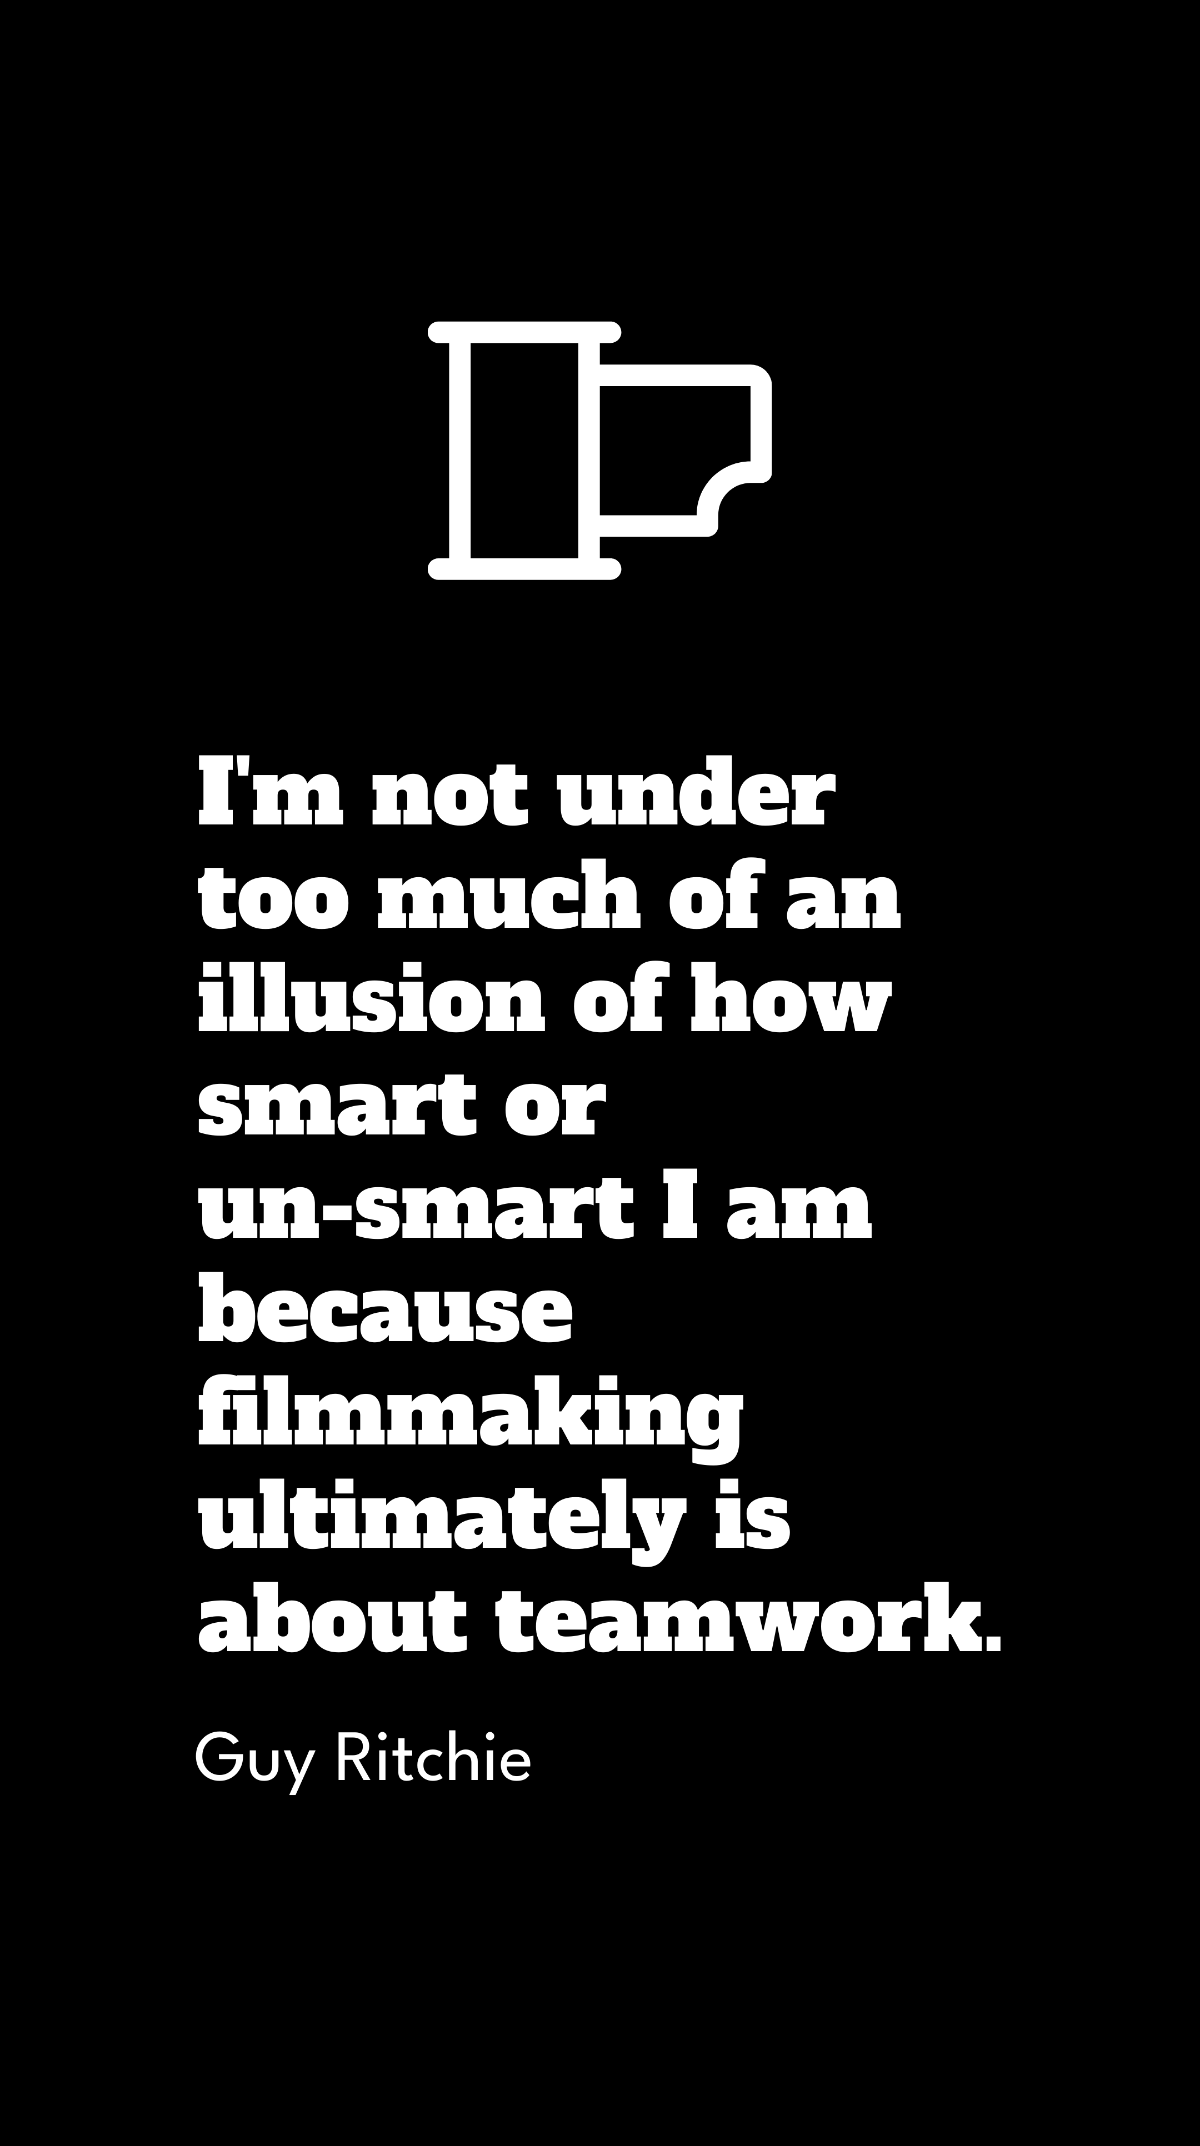 Free Guy Ritchie - I'm not under too much of an illusion of how smart or un-smart I am because filmmaking ultimately is about teamwork. Template